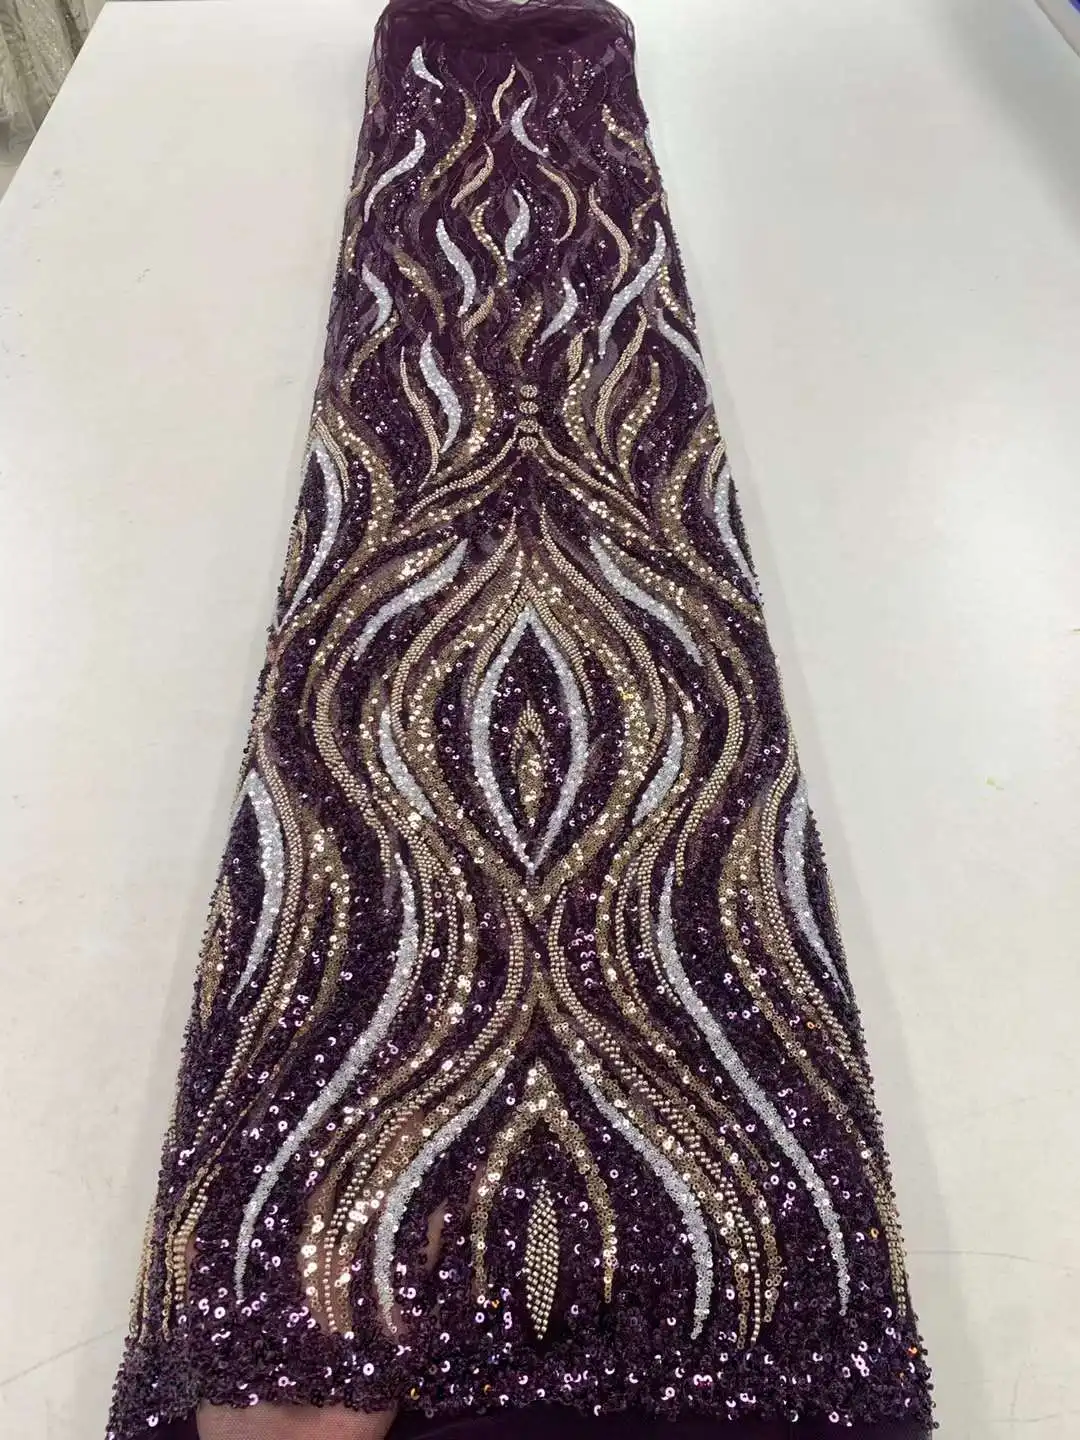 High Quality African Lace Fabric 2023 French Net Sequins Fabric Sewing Embroidered Beads Tulle Nigerian Lace Fabric 5Yards  african lace fabric french net sequins fabric 2023 high quality embroidered lace tulle nigerian lace fabric for sewing 5 yards